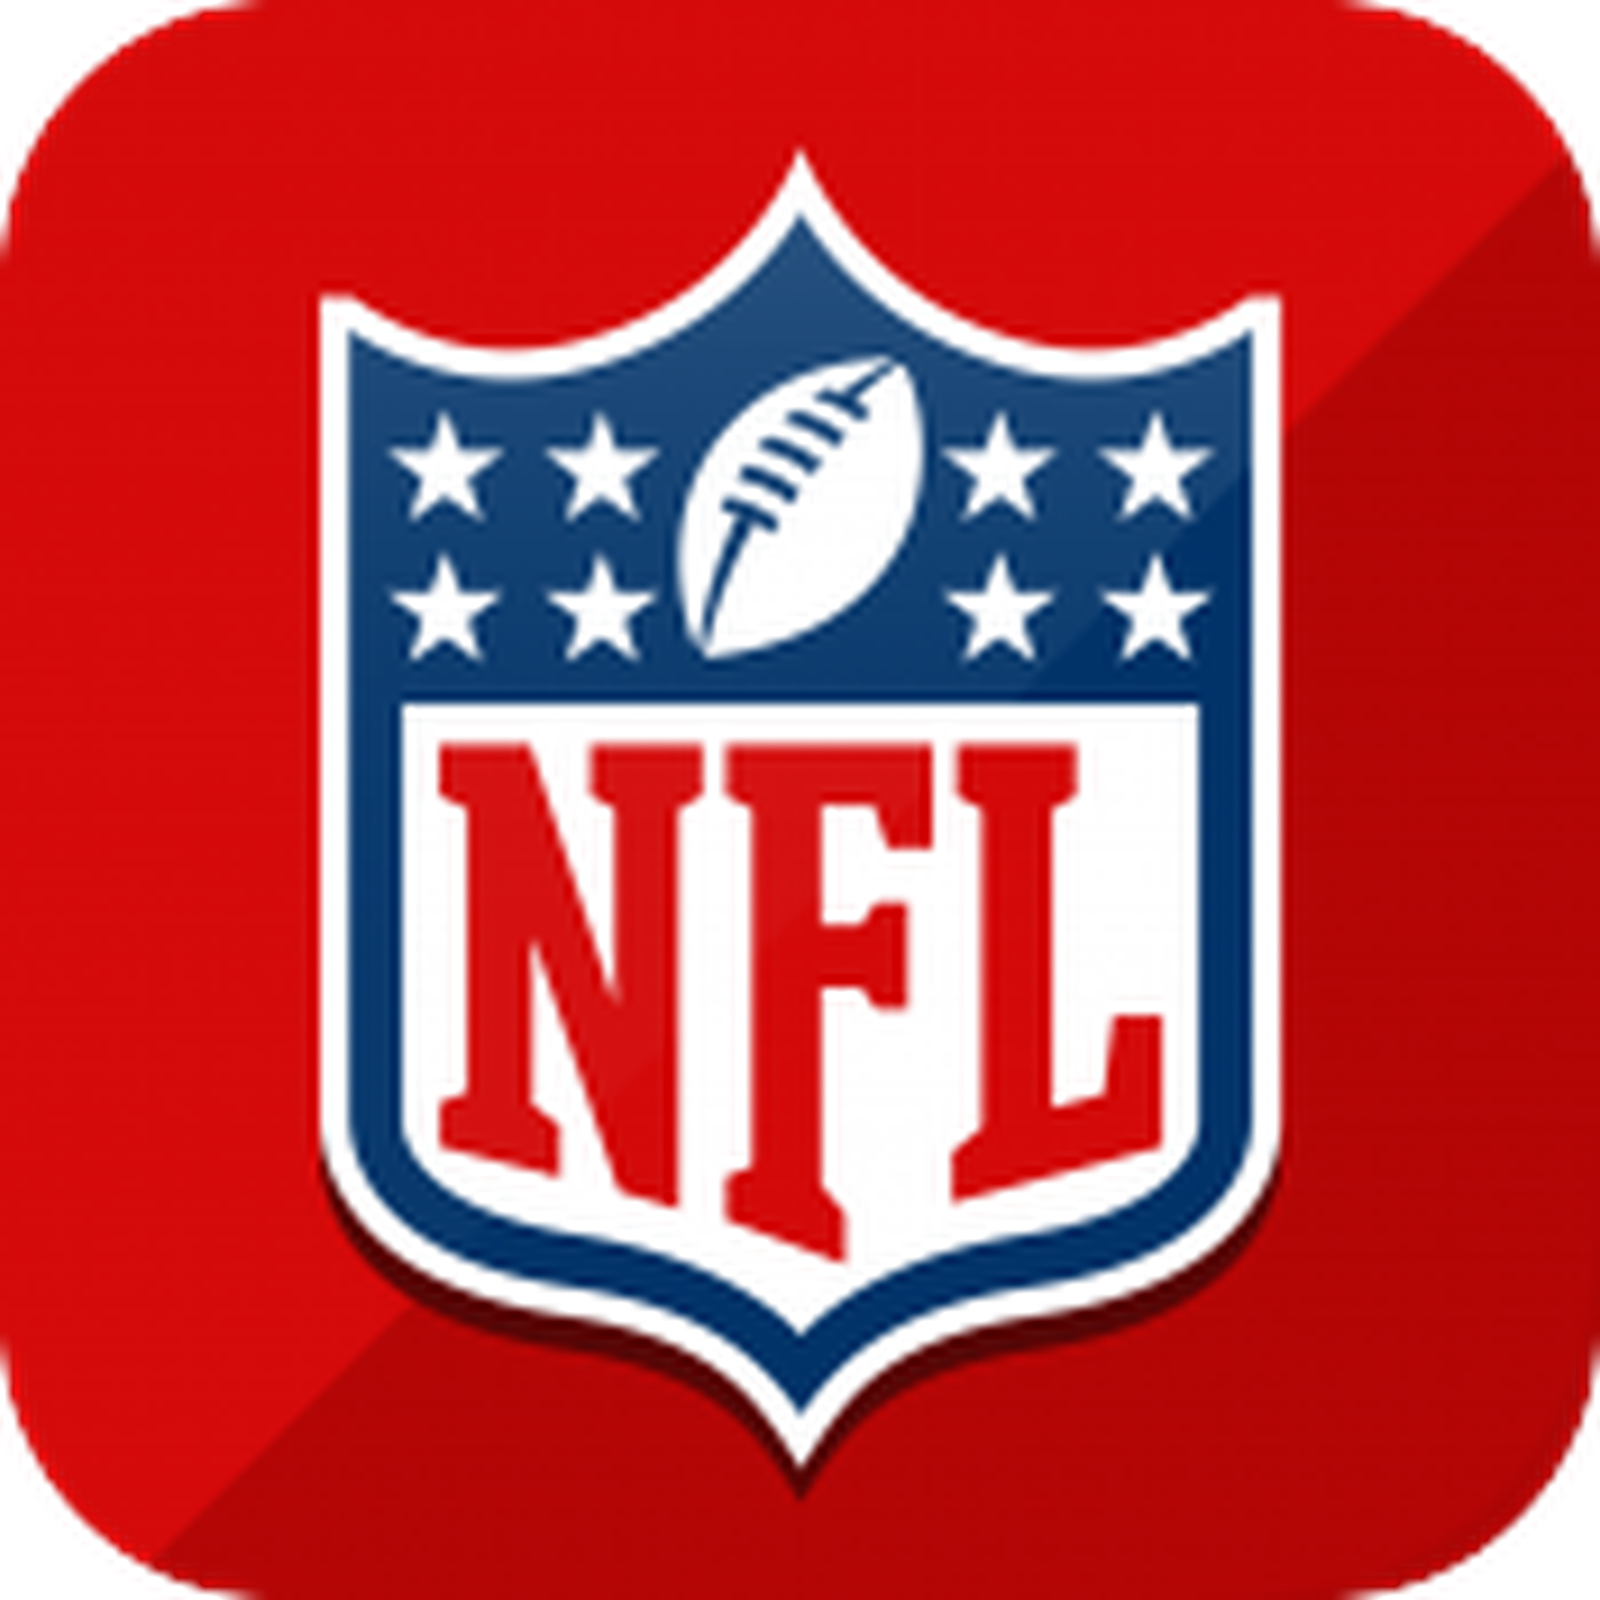 NFL 'Game Pass' With On-Demand Game Broadcasts Coming to Apple TV -  MacRumors